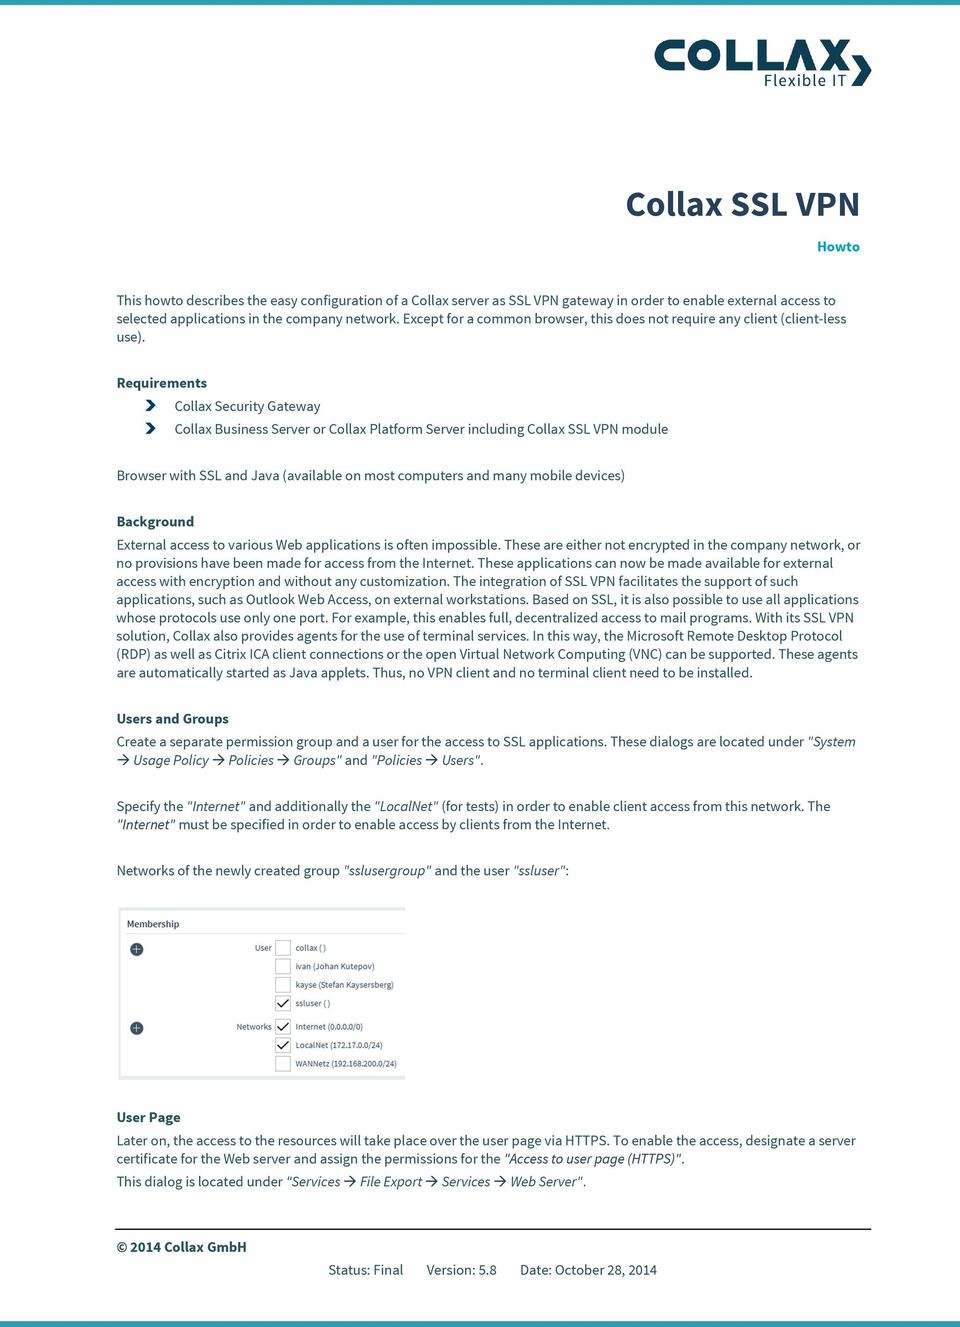 Requirements Collax Security Gateway Collax Business Server or Collax Platform Server including Collax SSL VPN module Browser with SSL and Java (available on most computers and many mobile devices)